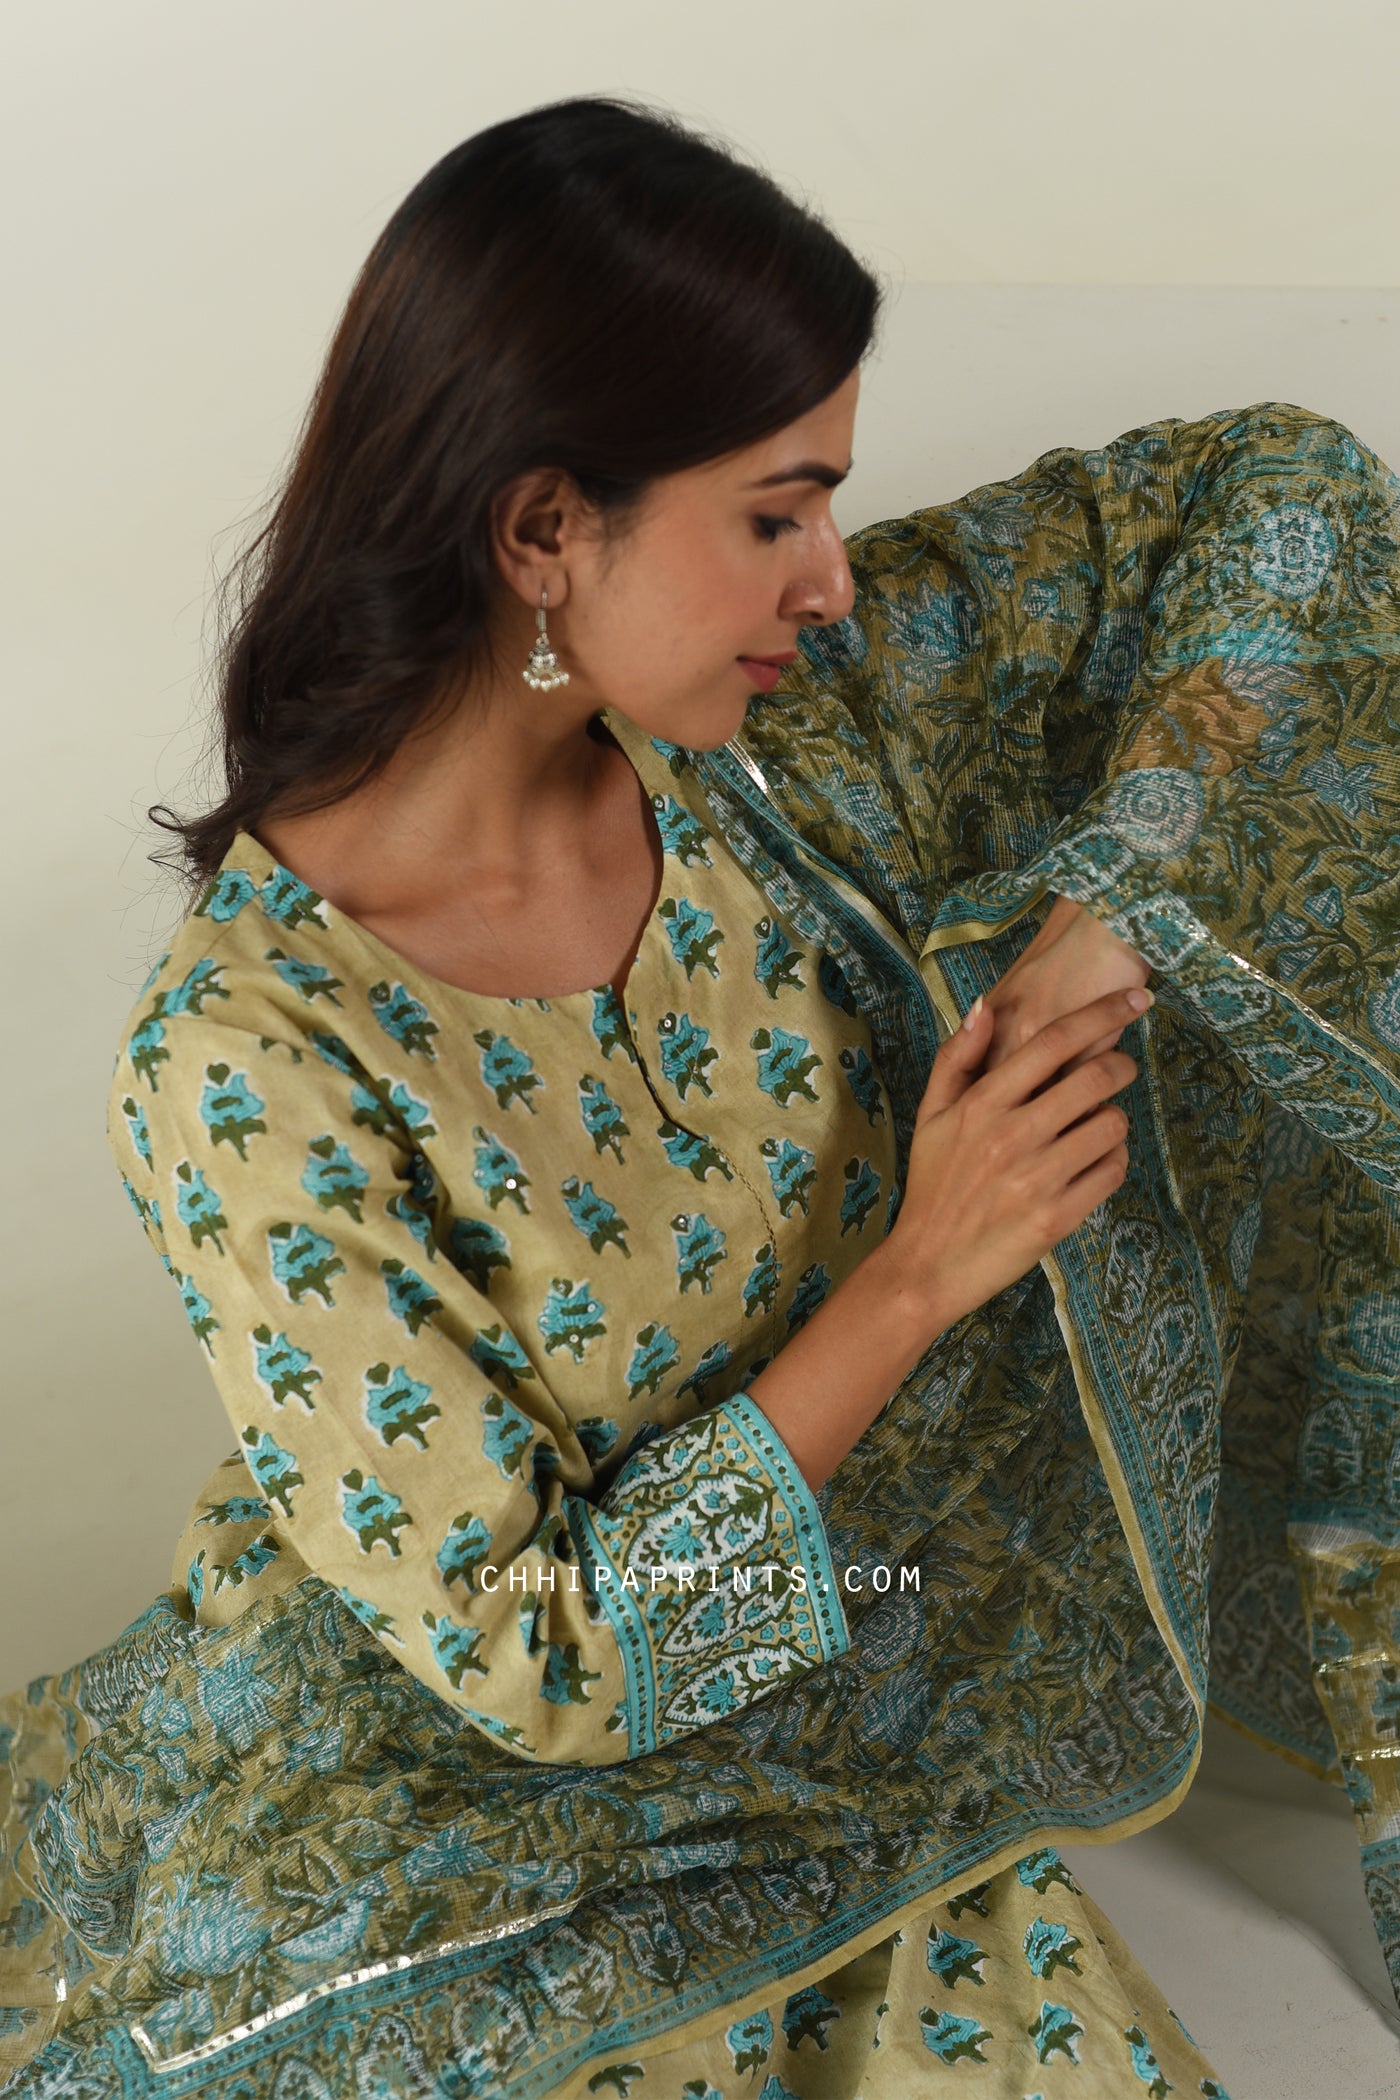 Cotton Gud Buti Block Print Suit Set in Shades of Tan and Turquoise Blue